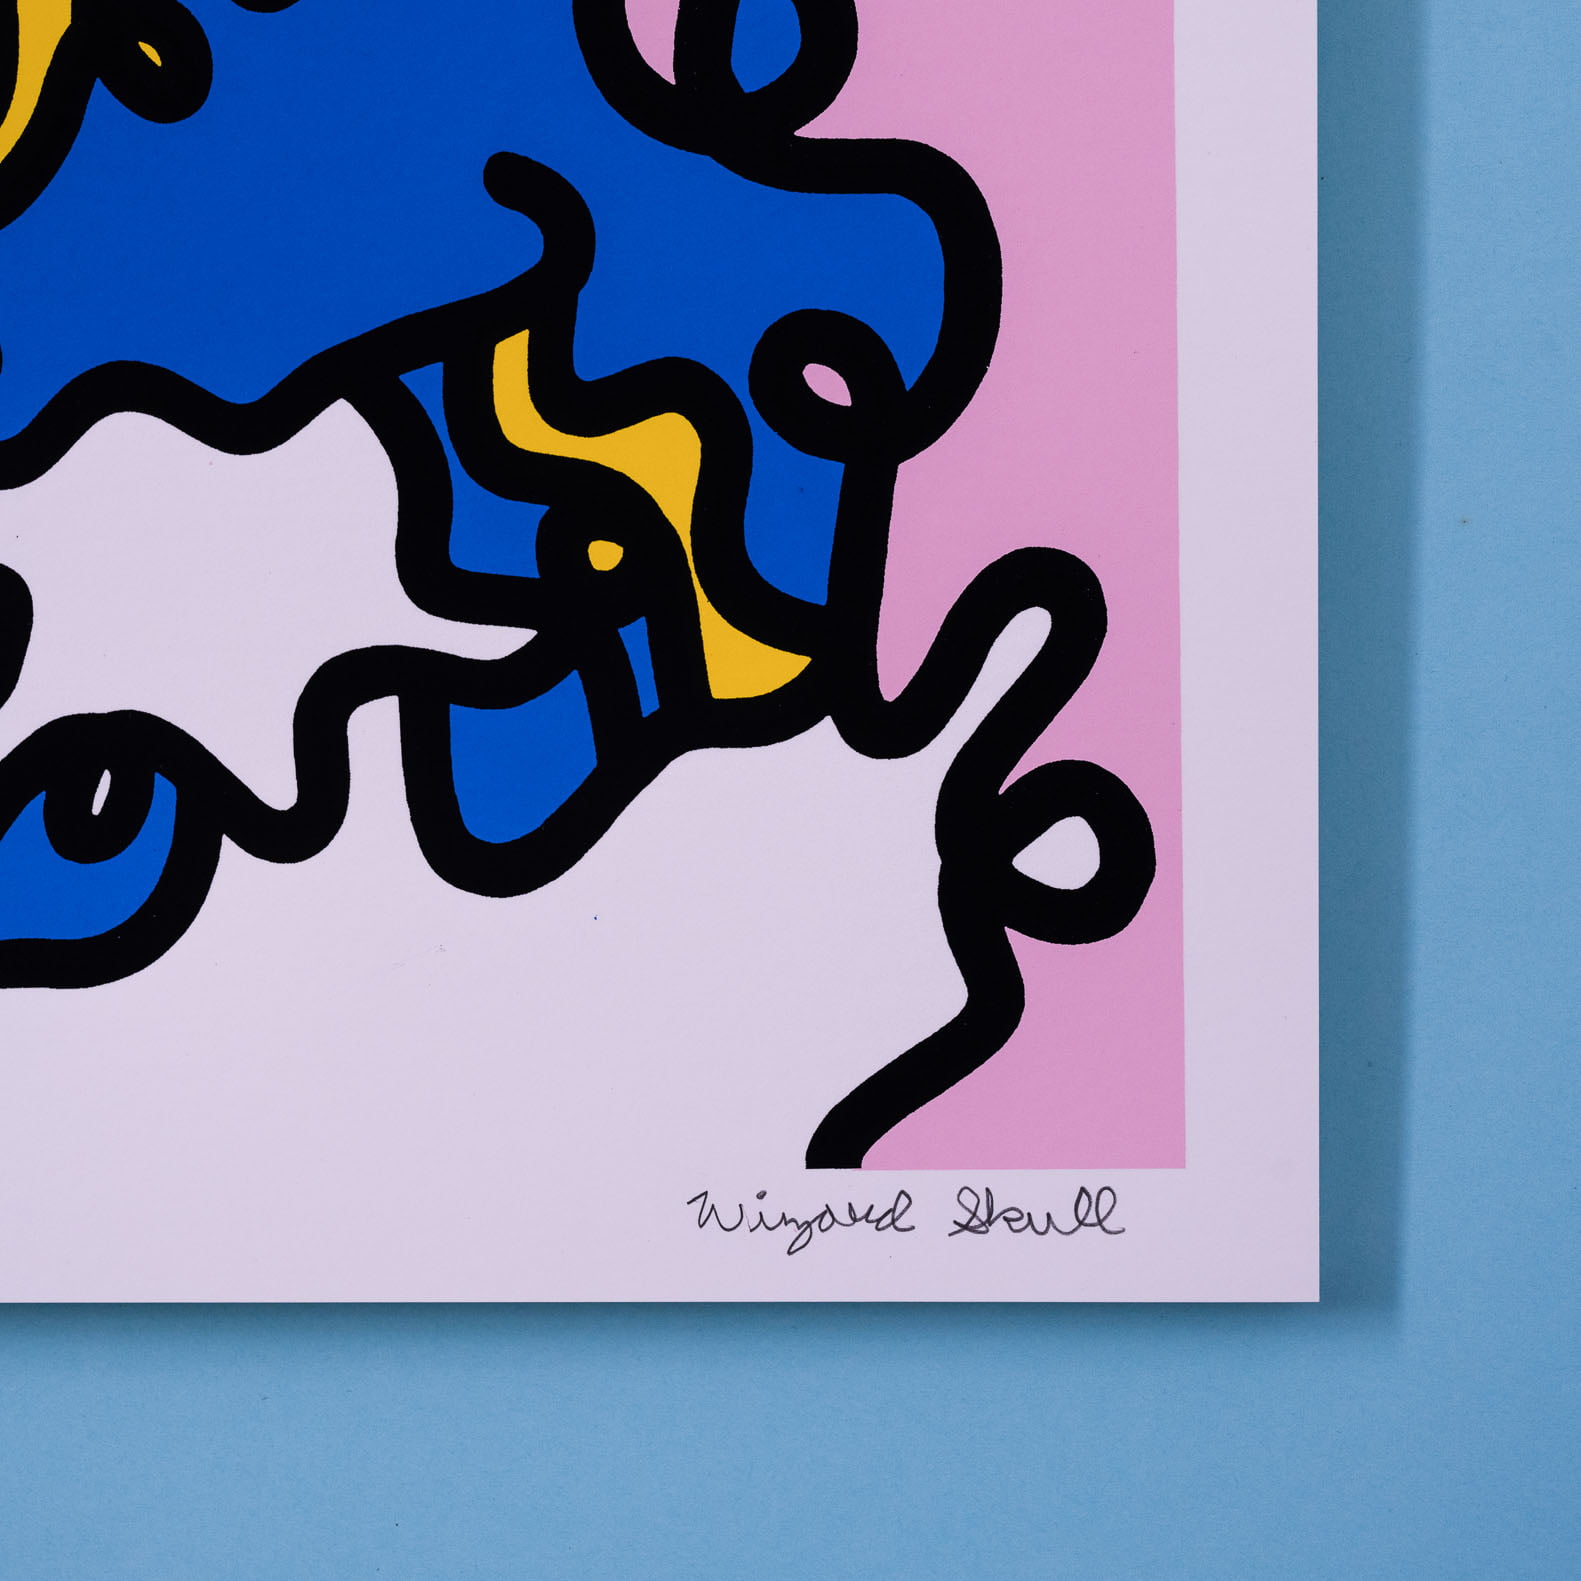 Detail and artist Wizard Skull signature of Simpsons Disneys Donald Duck with wobbly lines as a screen print edition